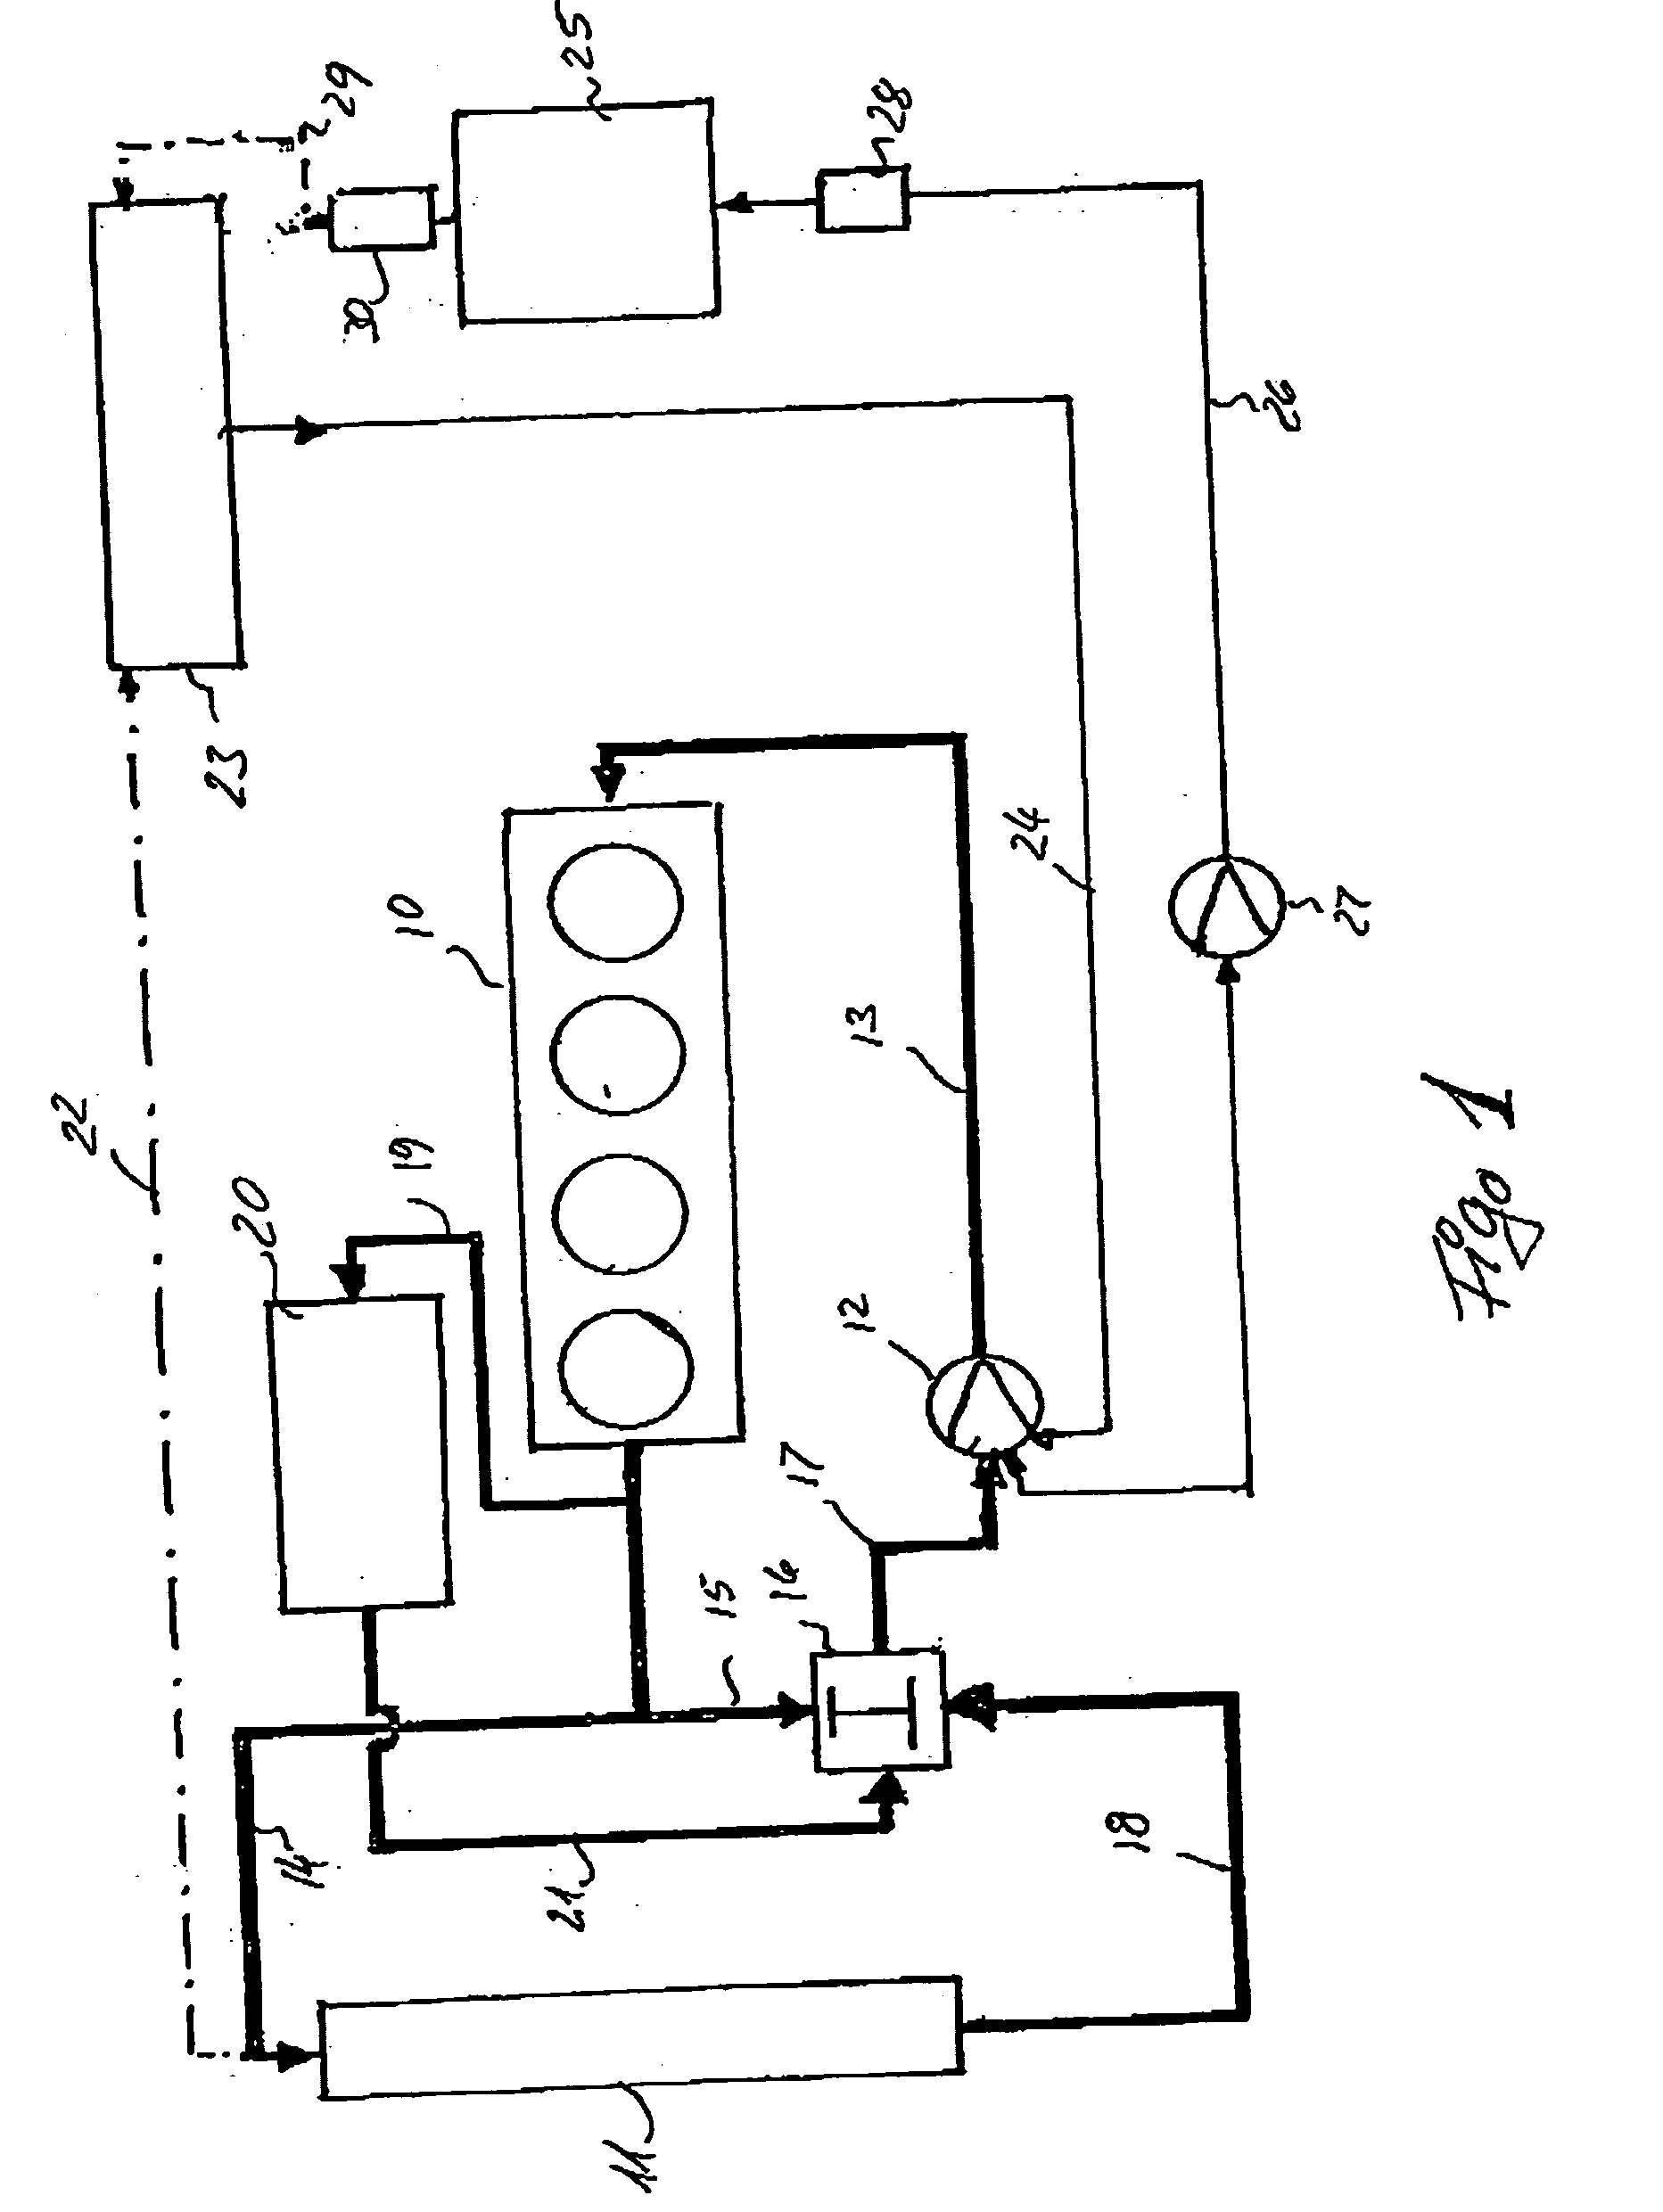 Method and apparatus for moderating the temperature of an internal combustion engine of a motor vehicle